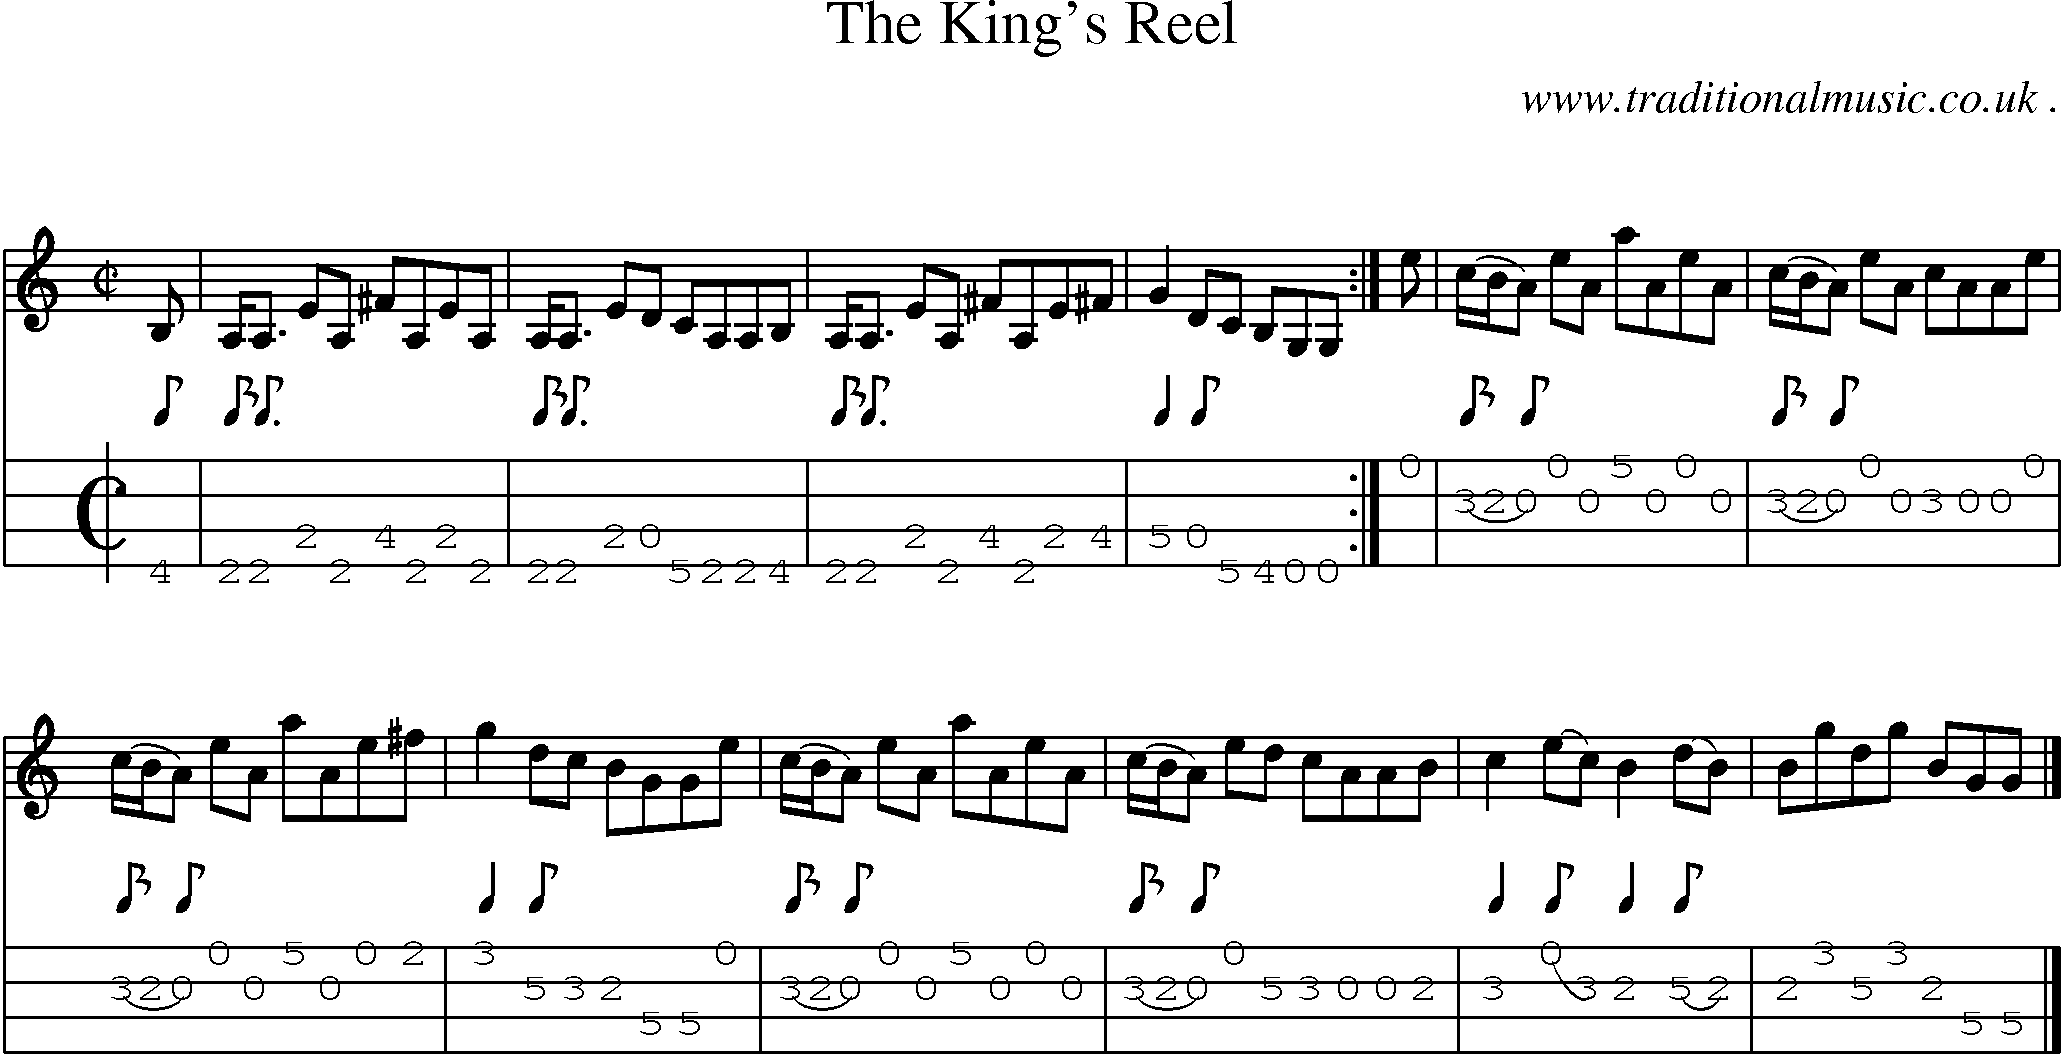 Sheet-music  score, Chords and Mandolin Tabs for The Kings Reel